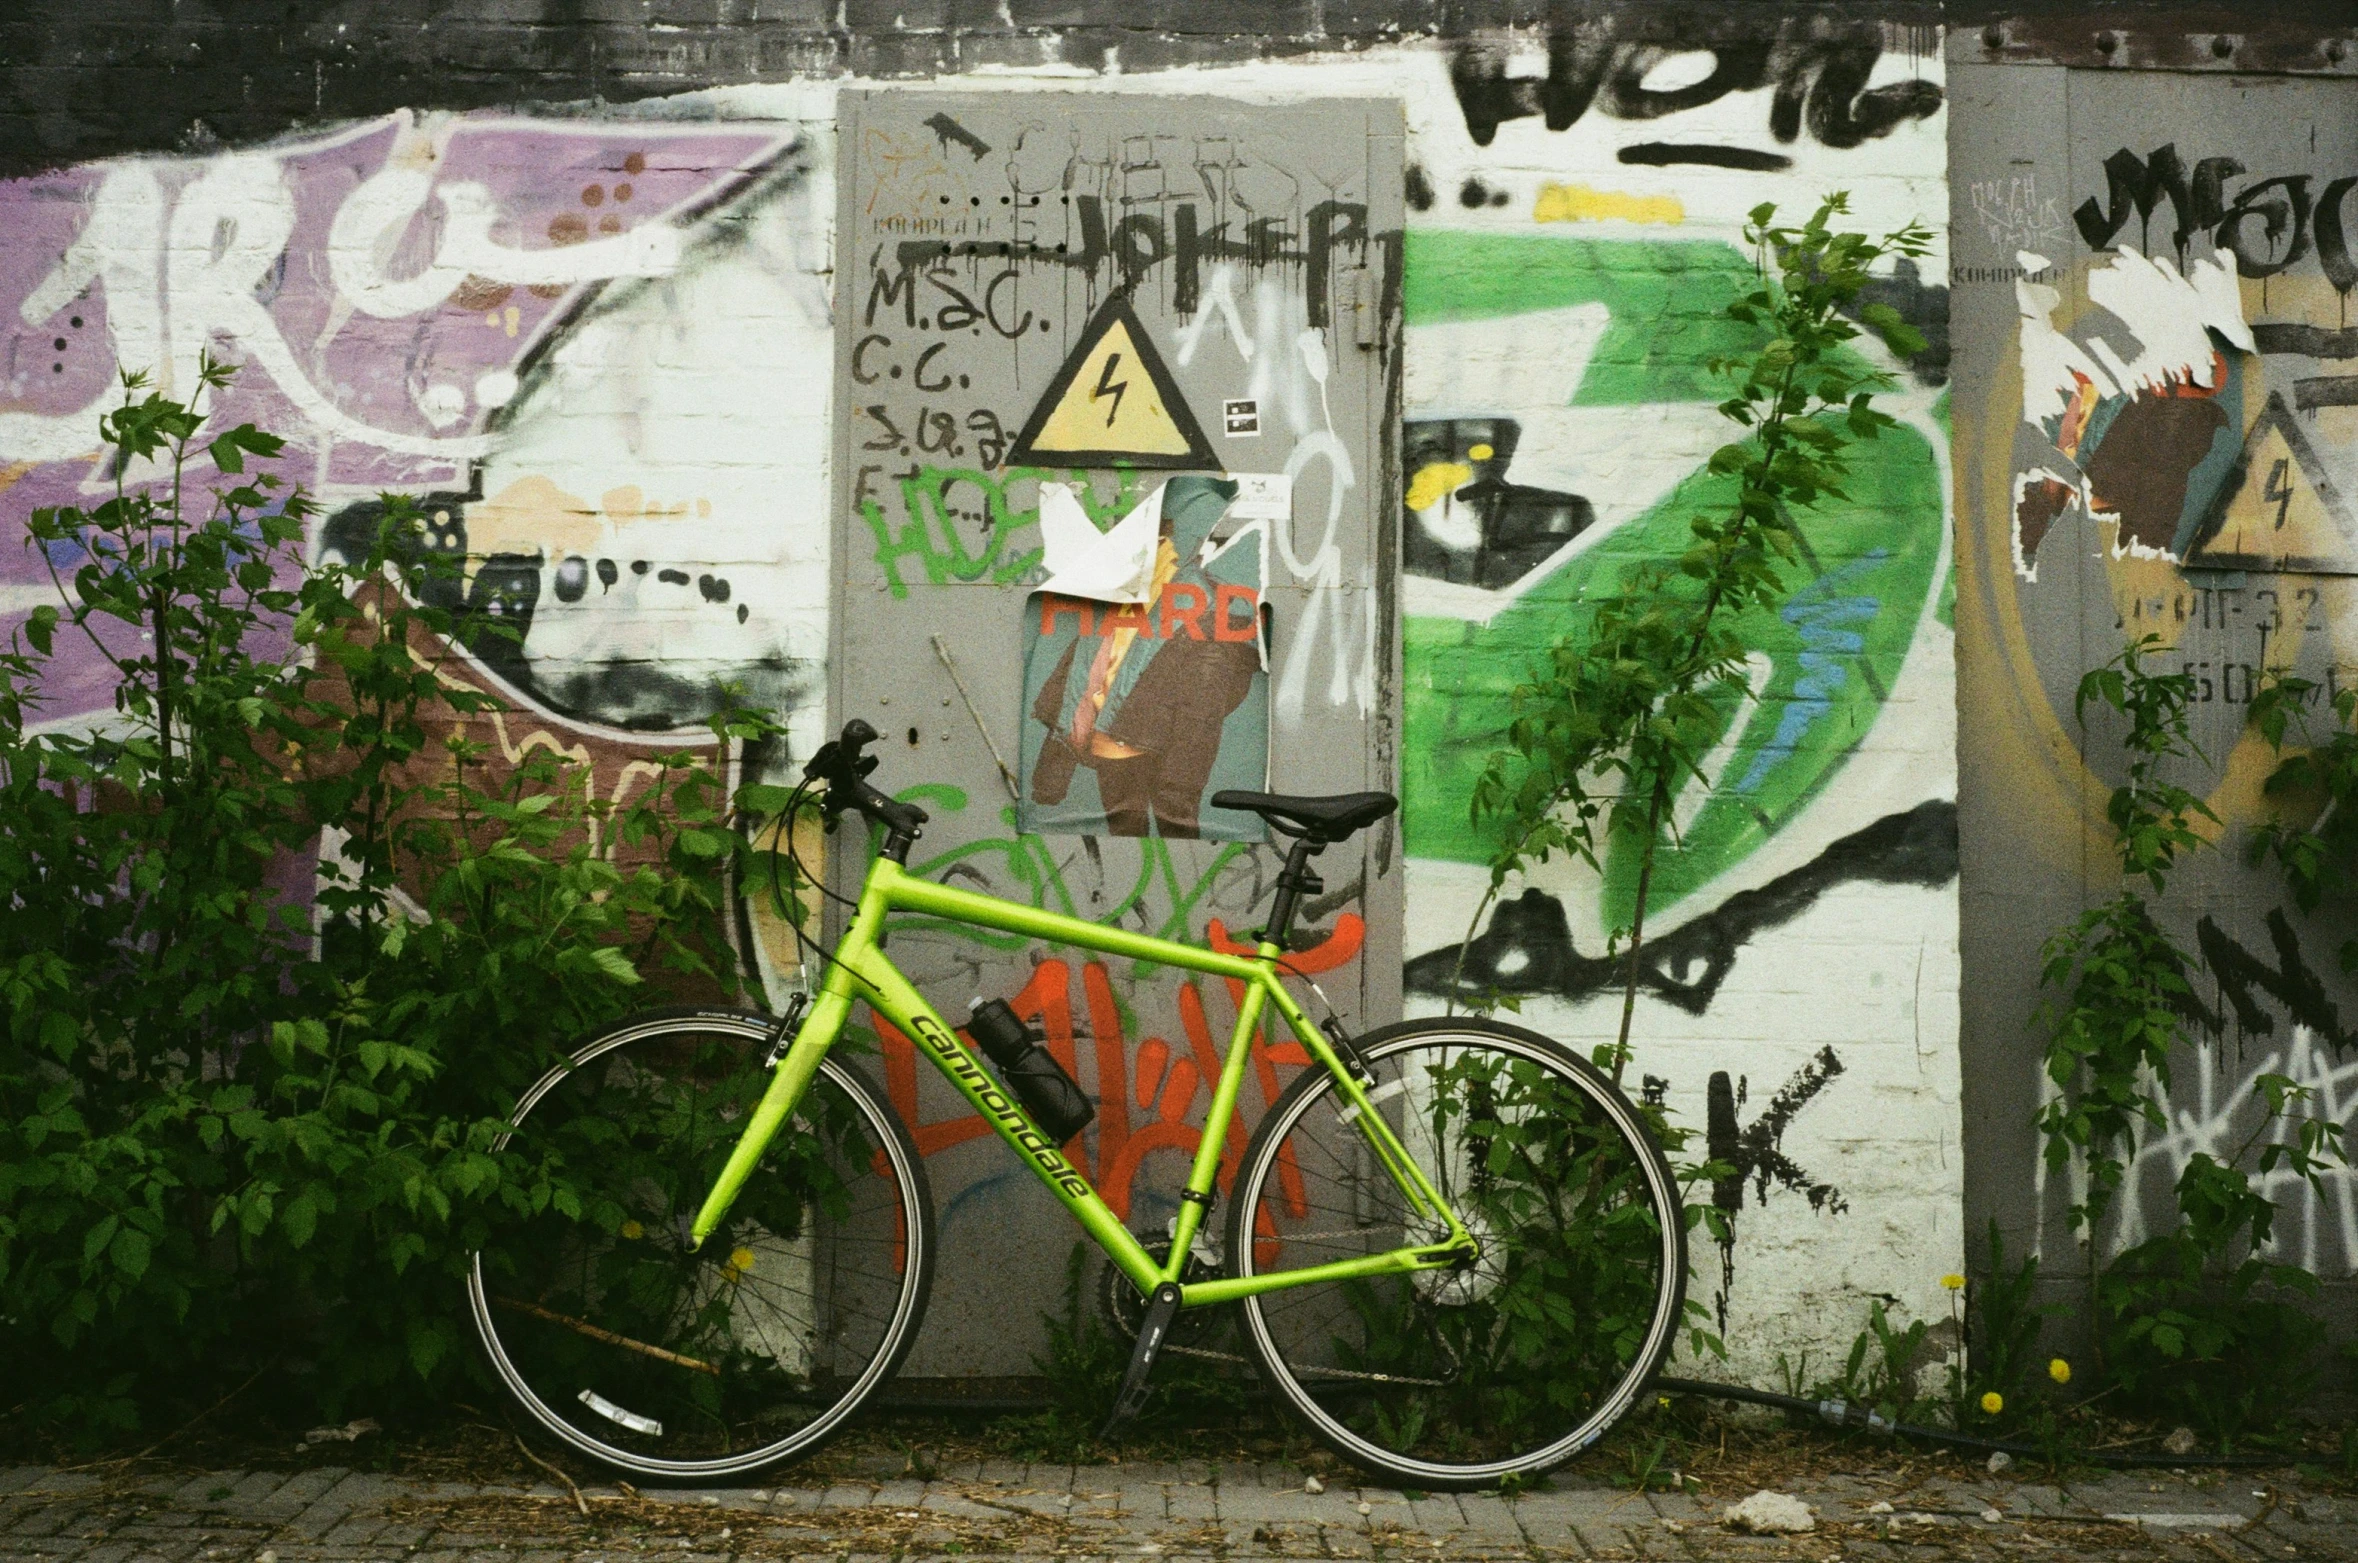 there is a green bike parked in front of a wall